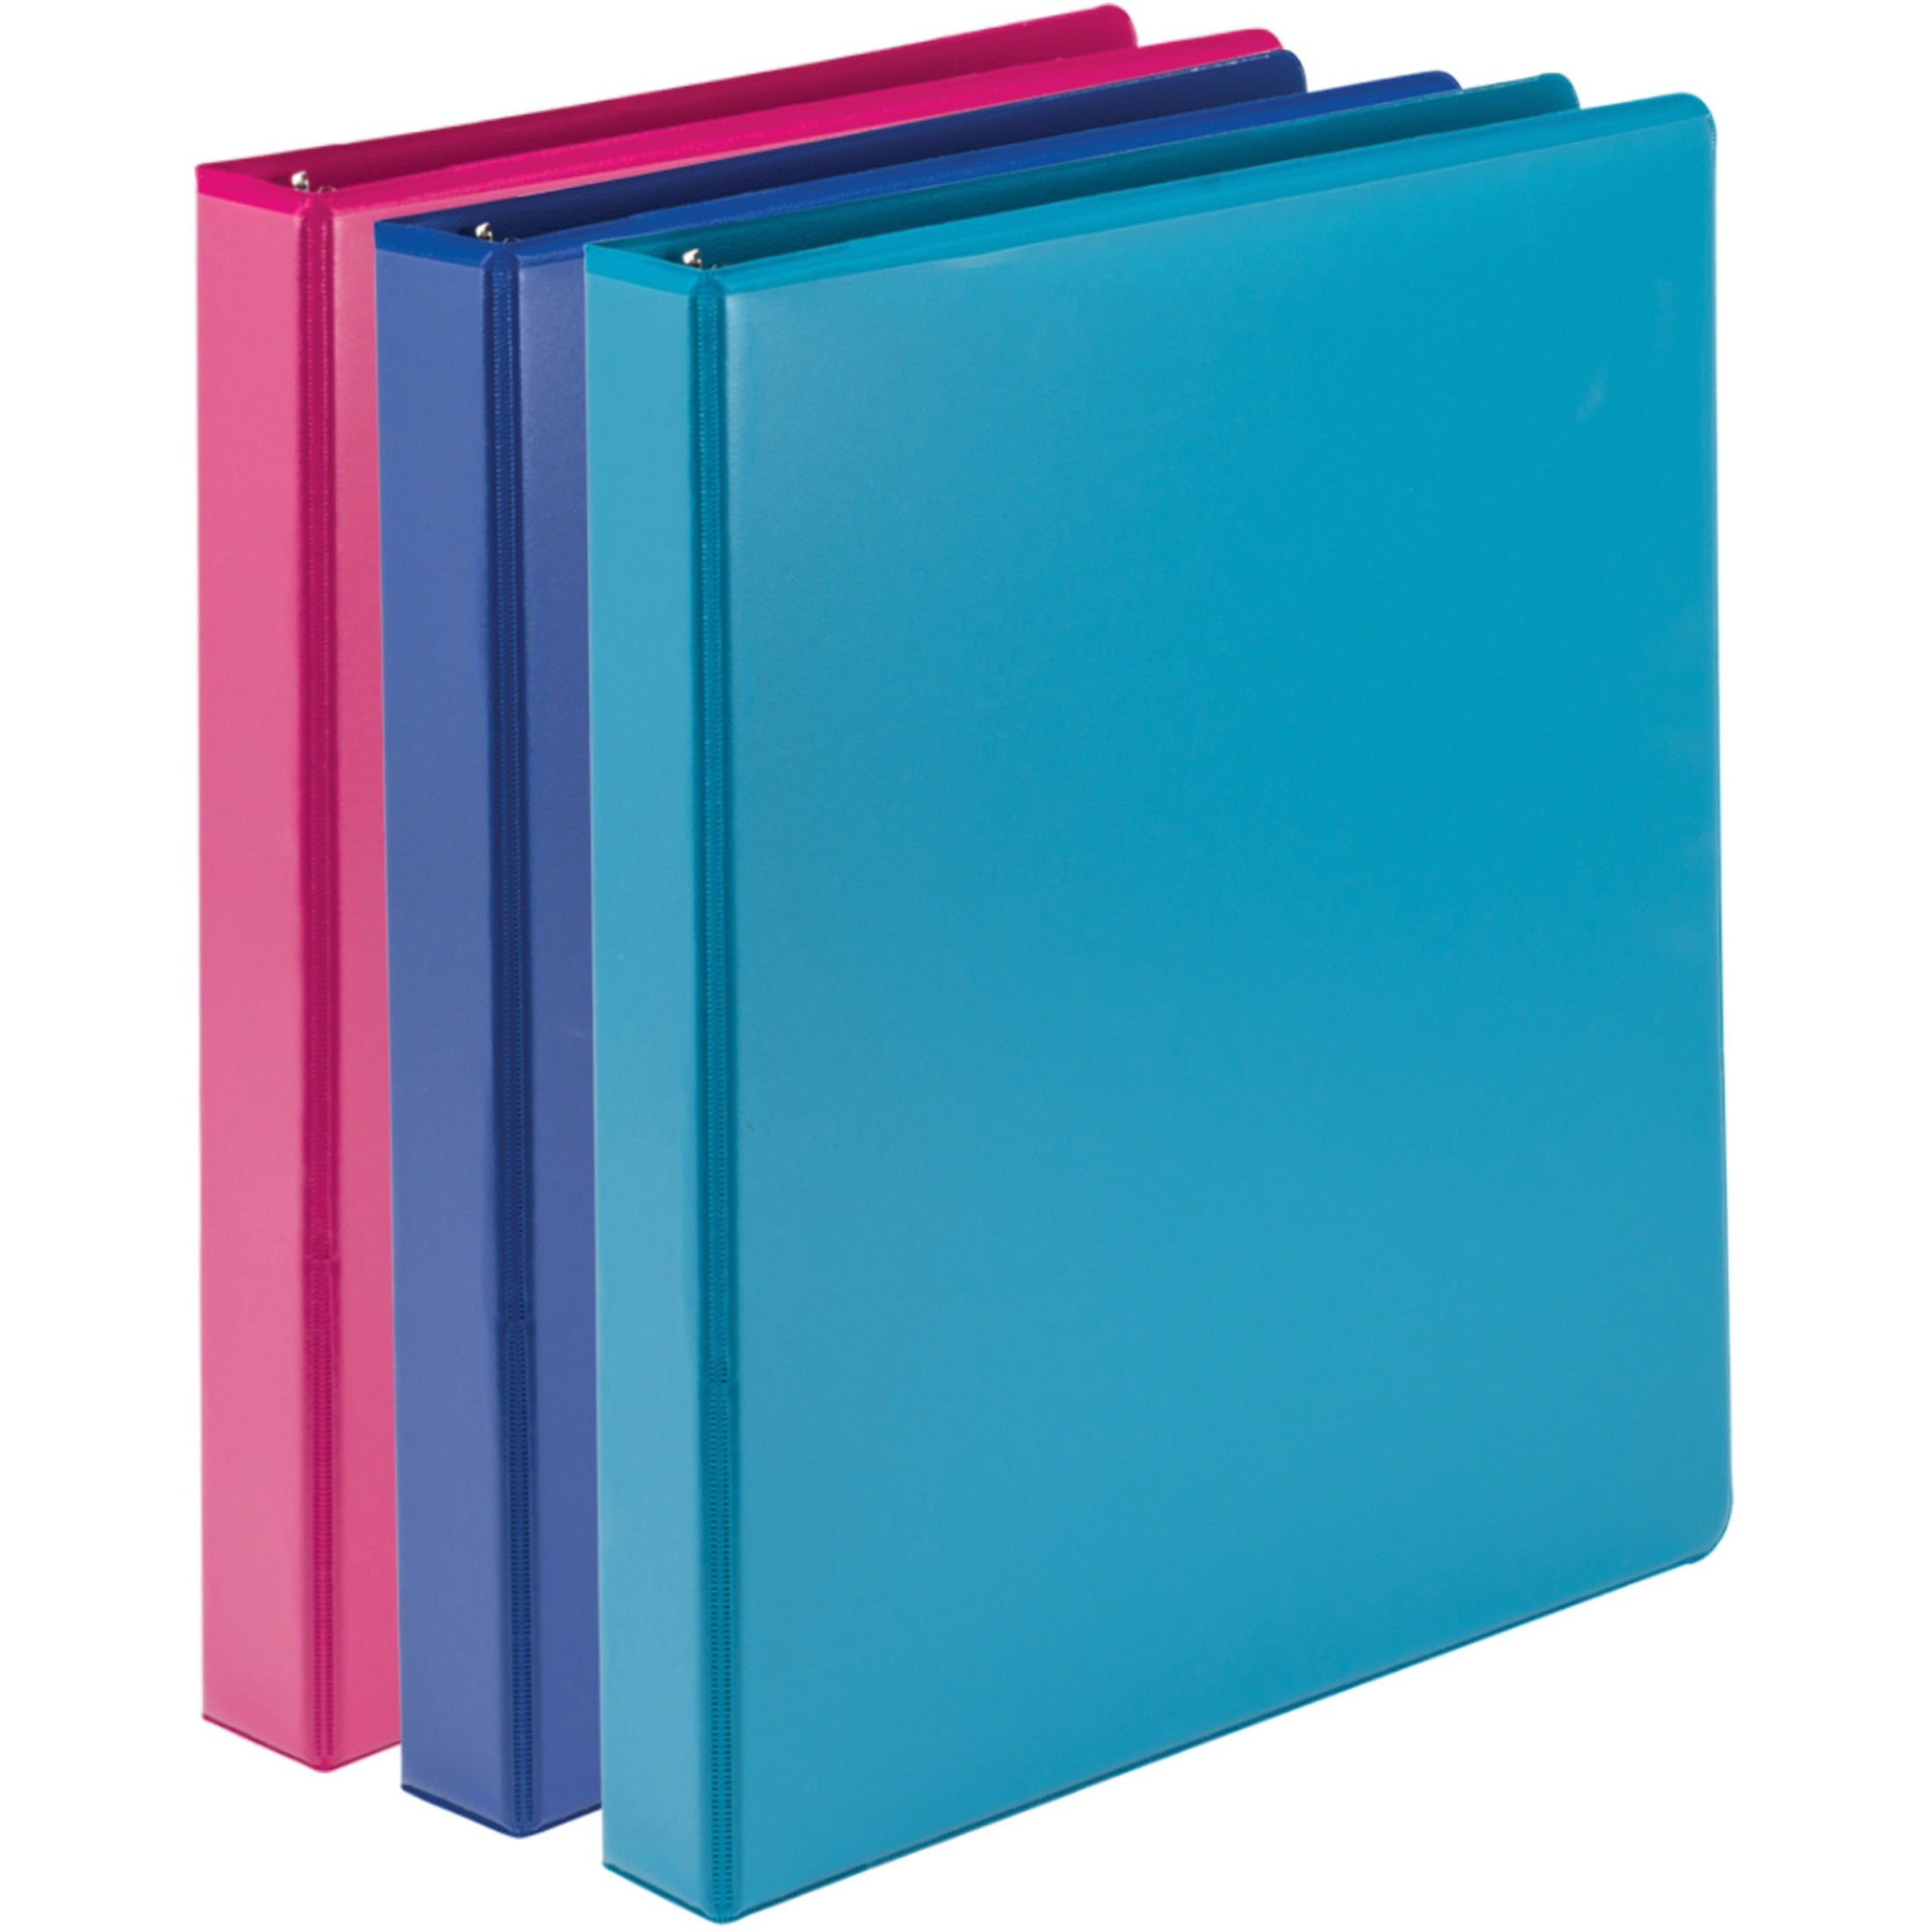 Eco-Friendly Samsill Earths Choice Fashion Assortment USDA Certified Biobased 2 Durable D-Ring View Binder 4 Pack MP46969